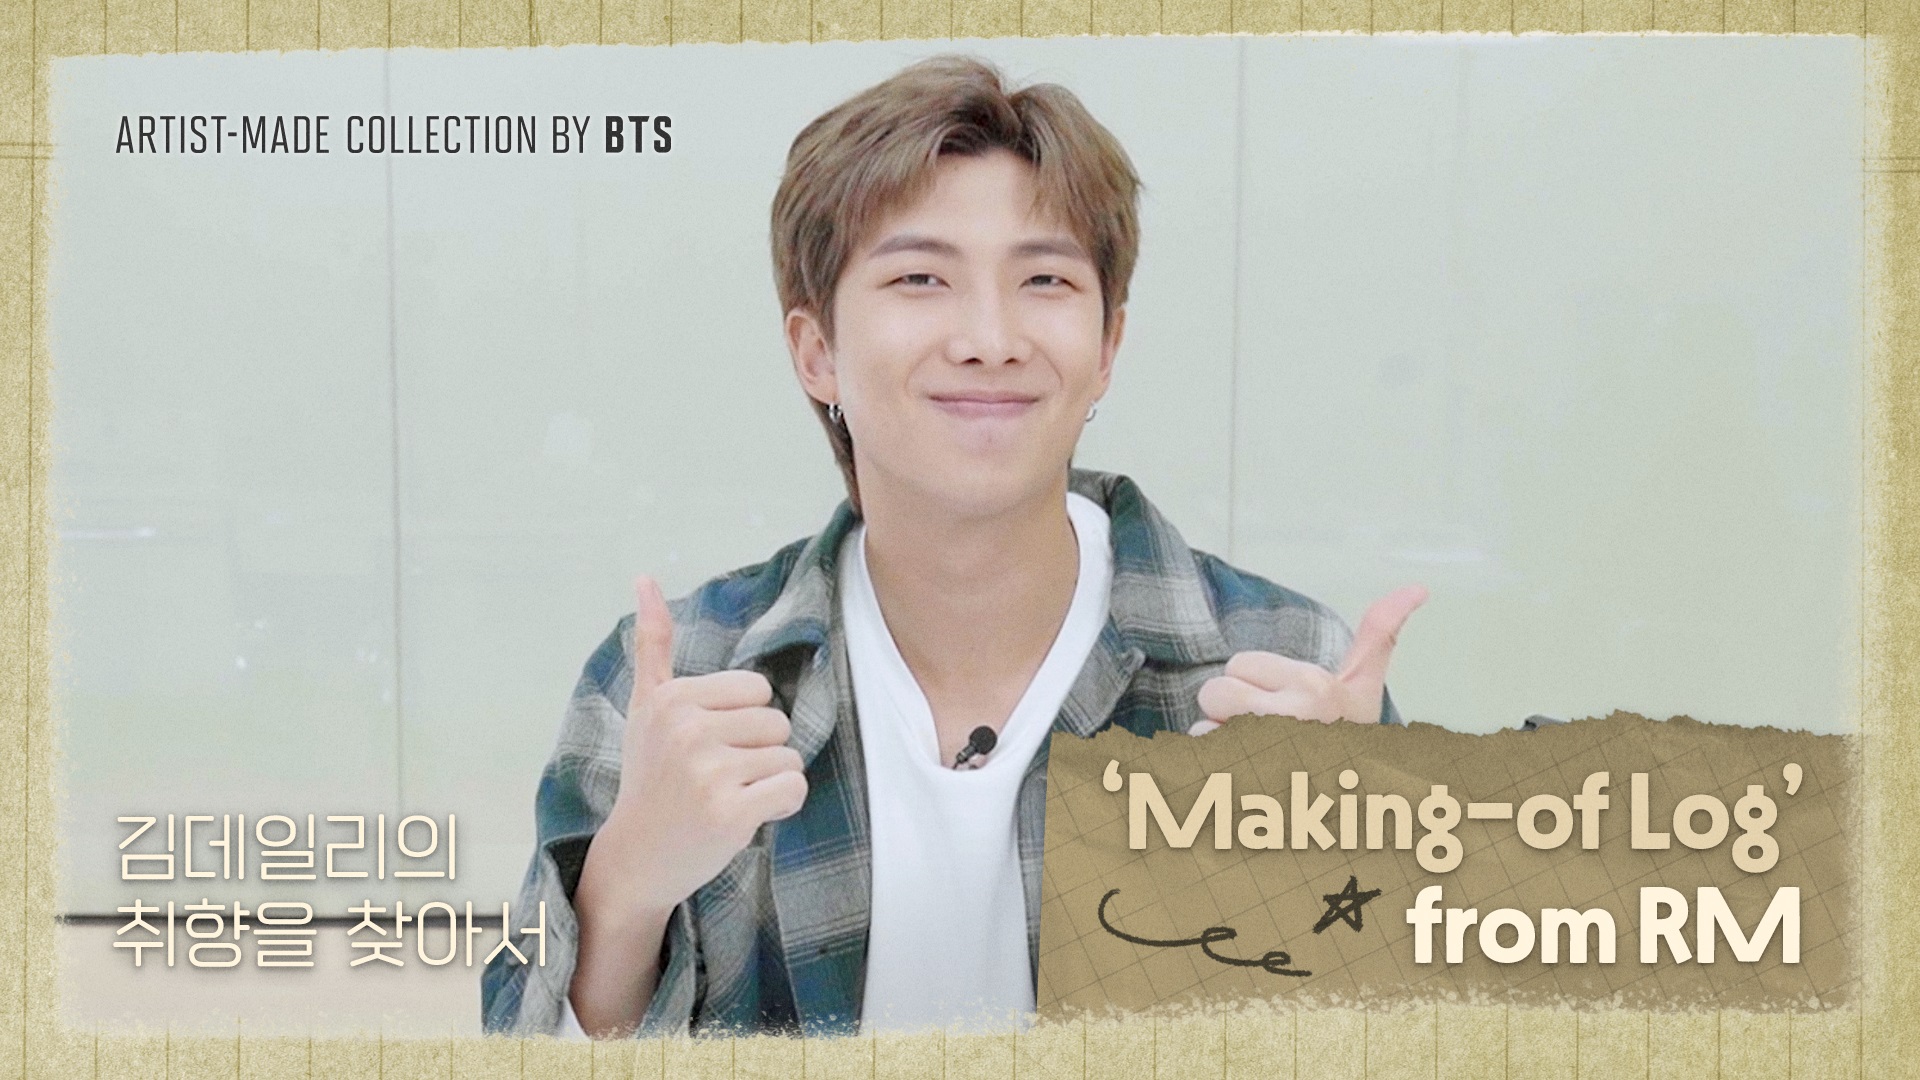 ARTIST-MADE COLLECTION BY BTS 'Making-of Log' from RM